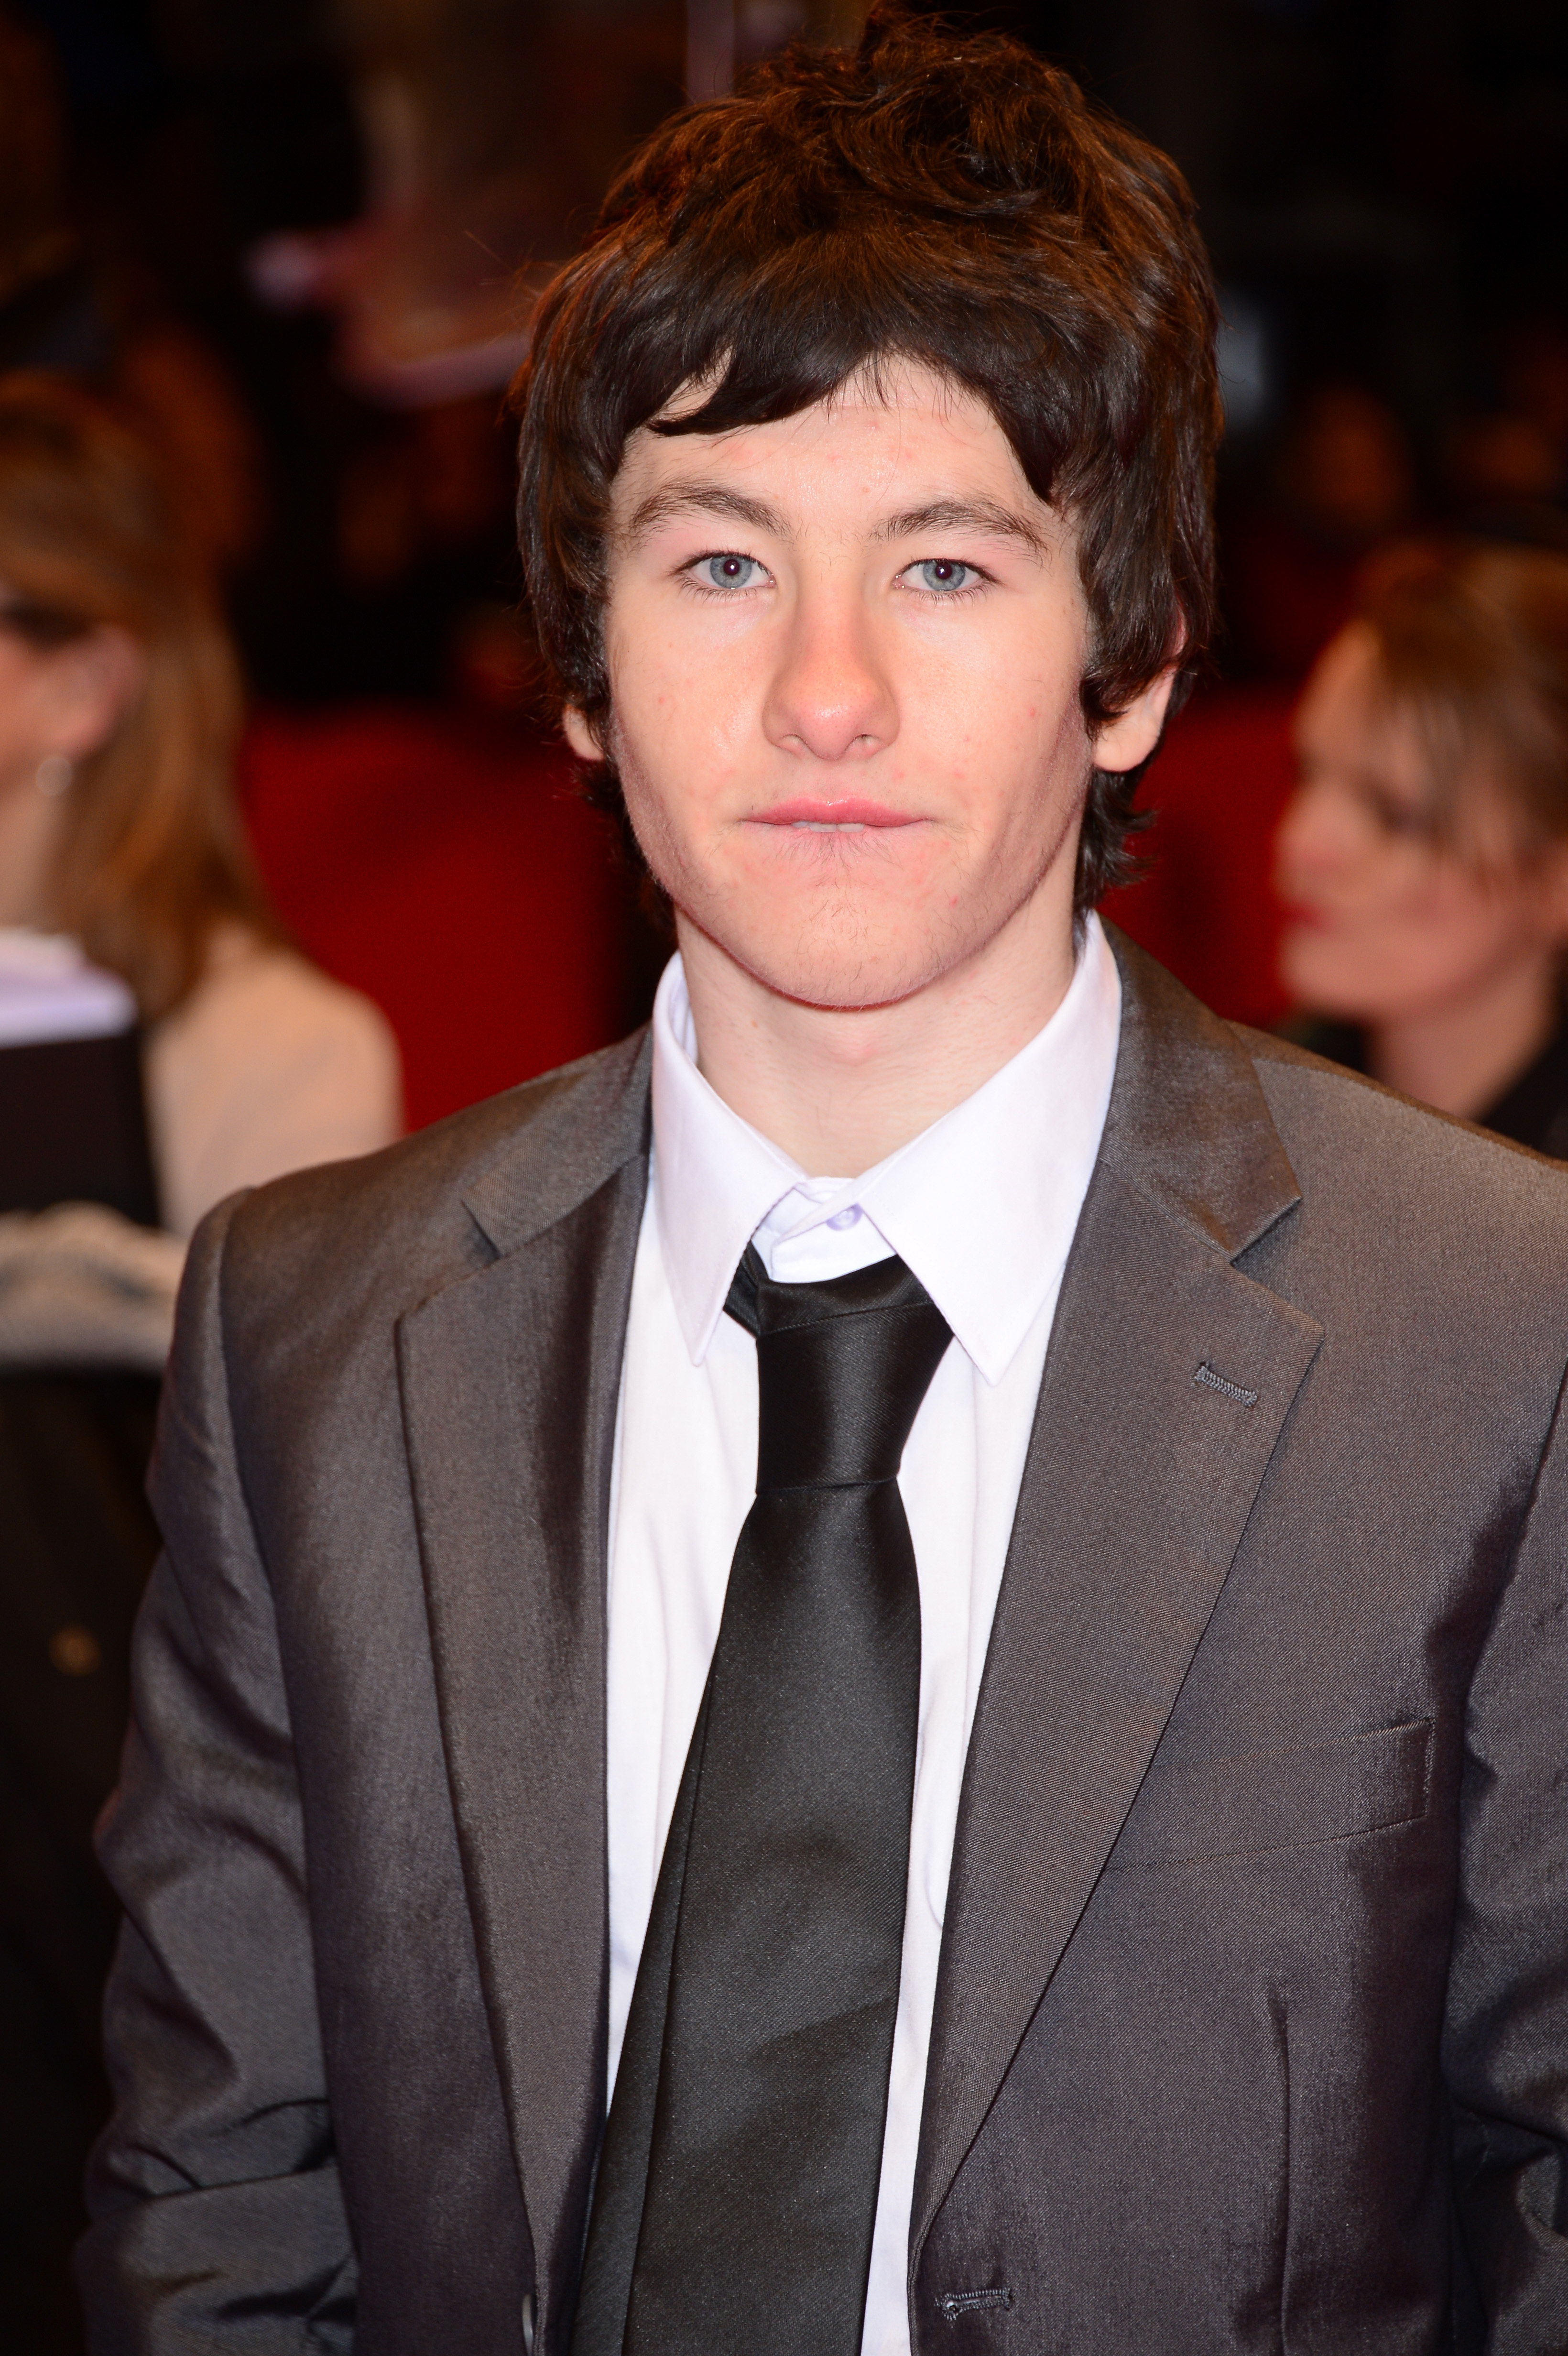 Barry Keoghan attends the 64th Berlinale International Film Festival on February 7, 2014 in Berlin, Germany | Source: Getty Images